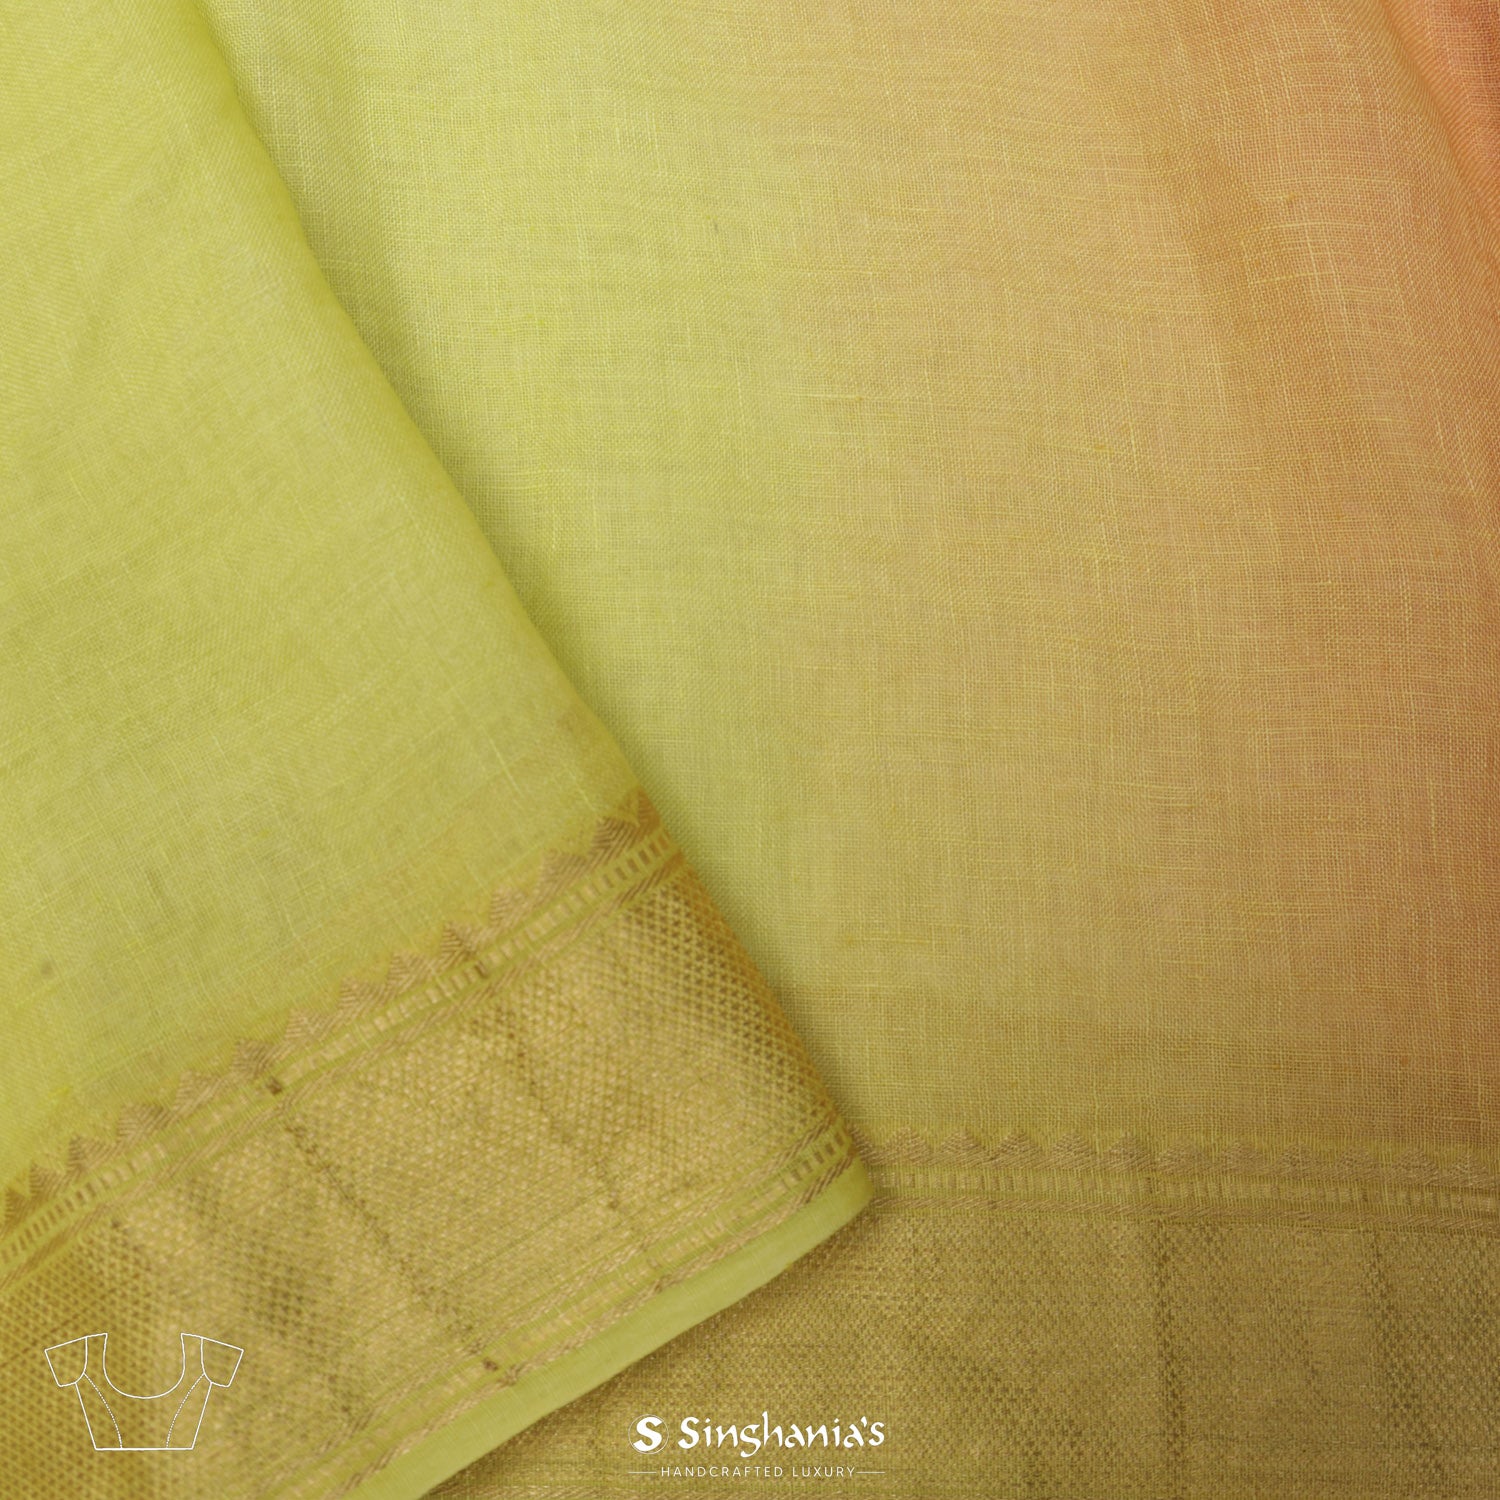 Yellow-Shade Linen Saree With Floral Thread Work Design